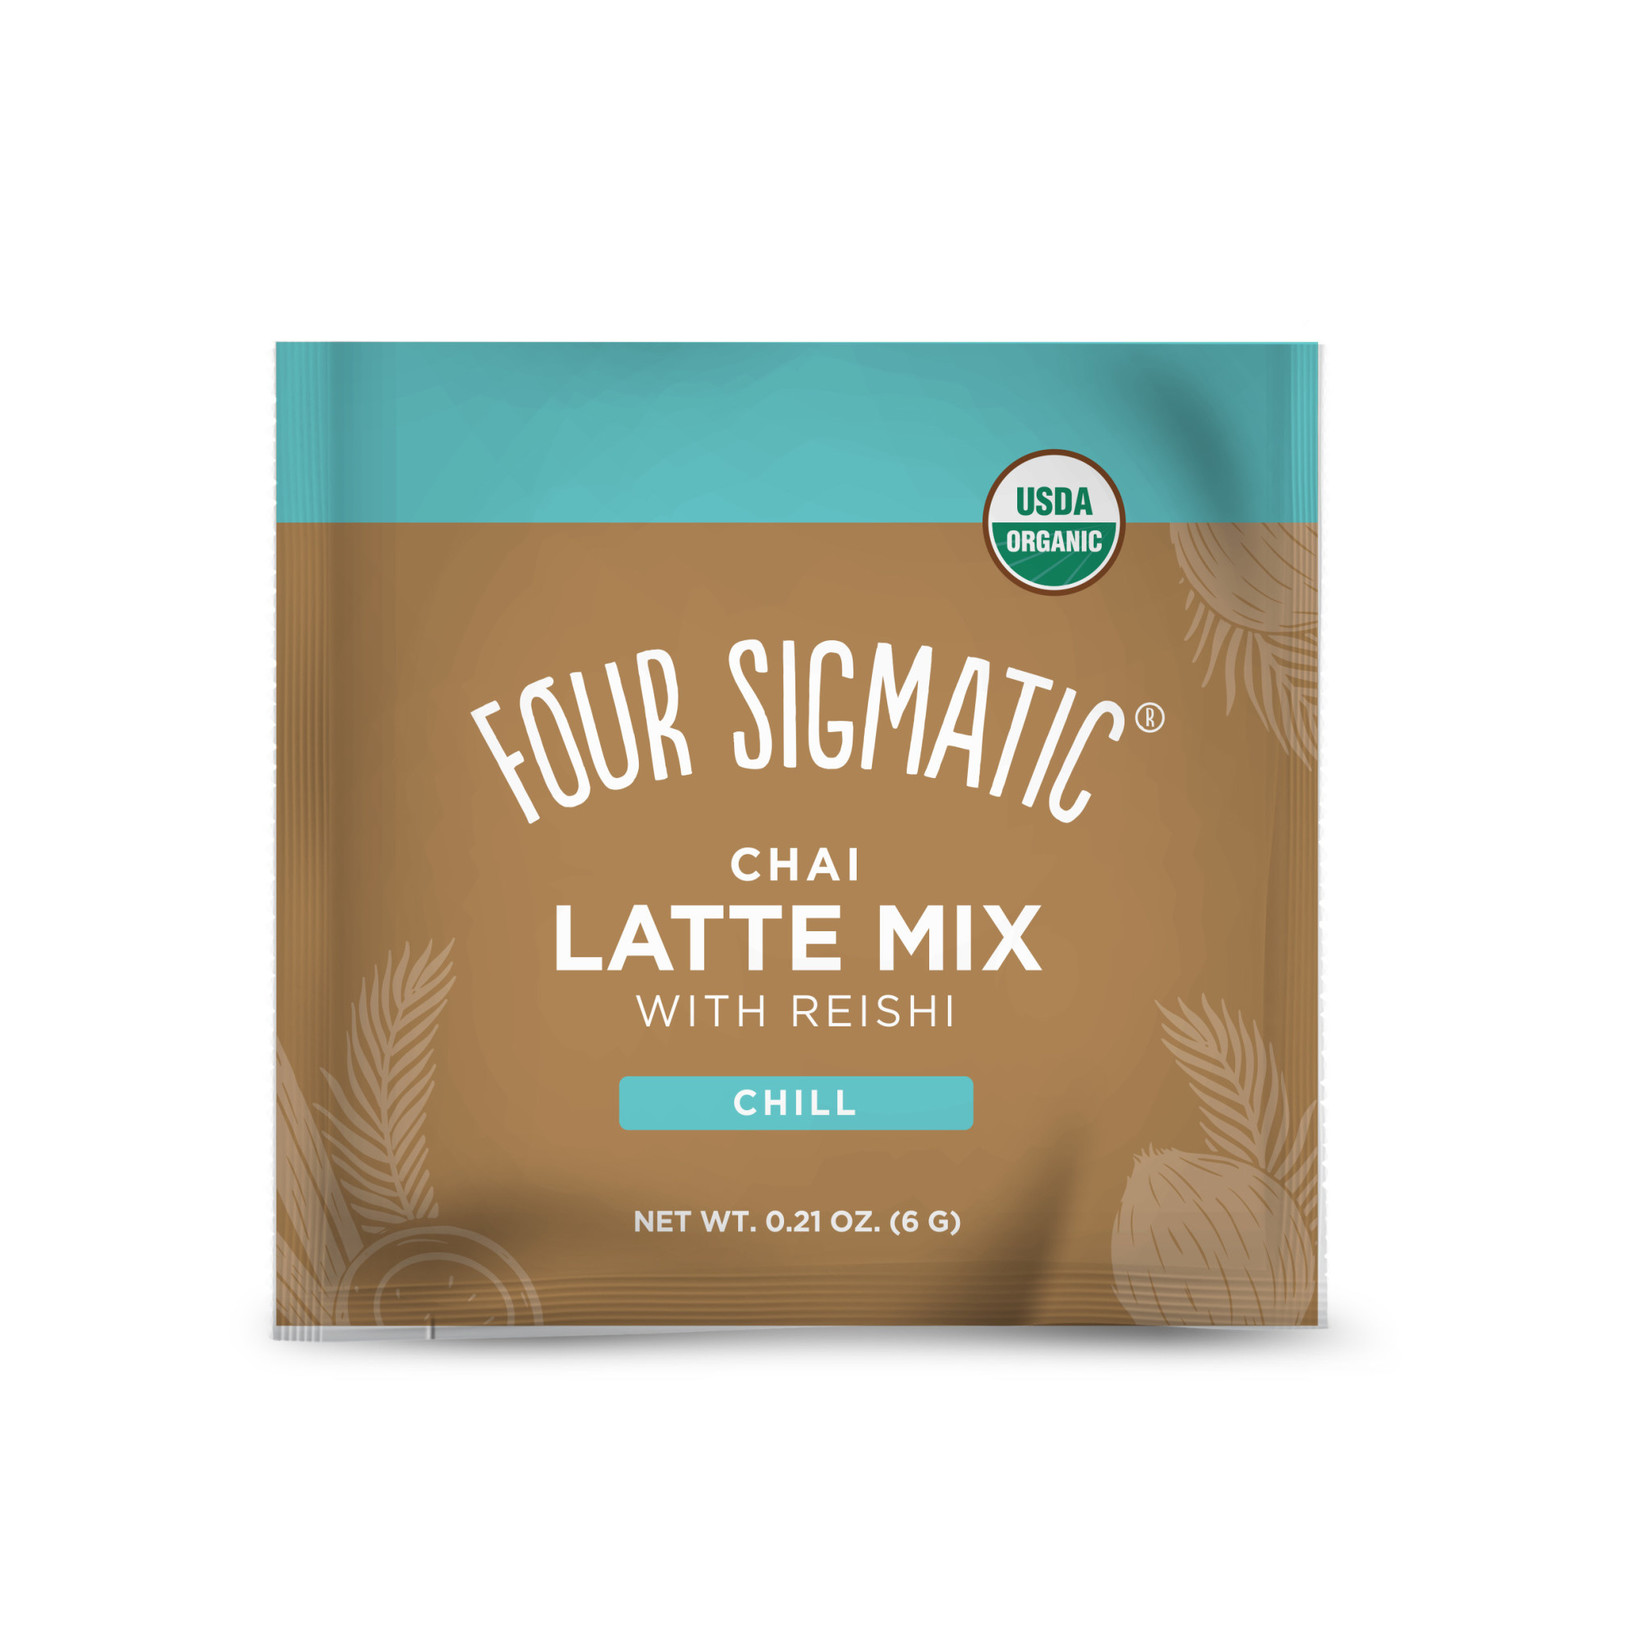 Four Sigmatic Four Sigmatic Chai Latte Mix With Reishi (Chill) 10 ct.